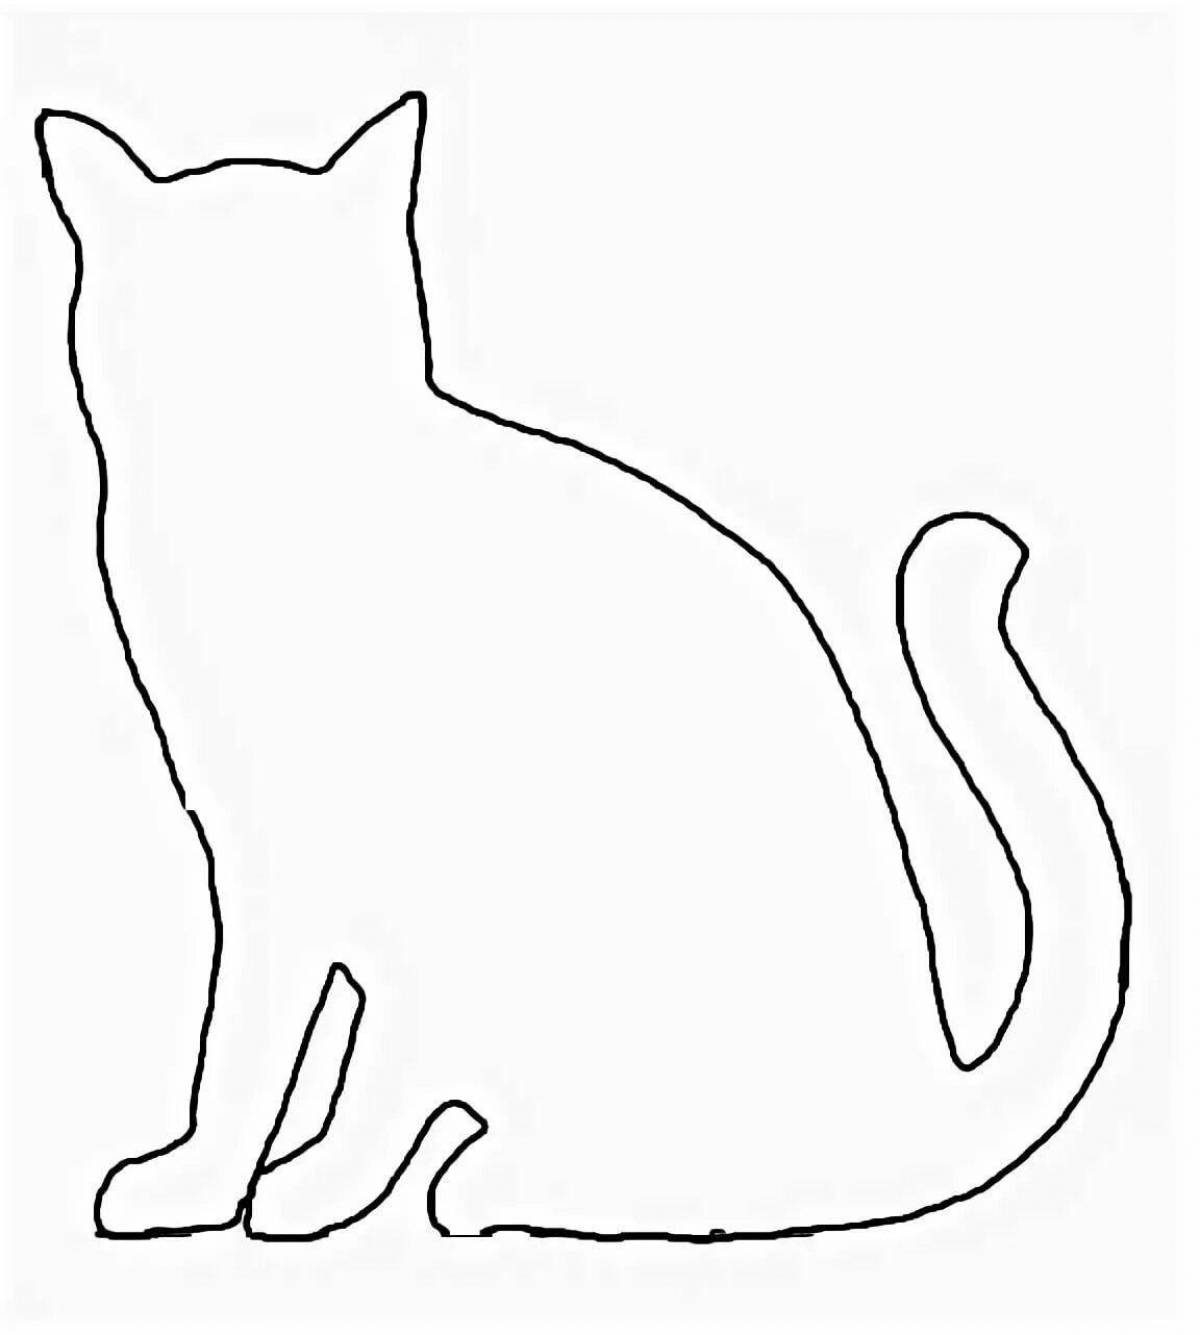 Coloring book silhouette of a graceful cat